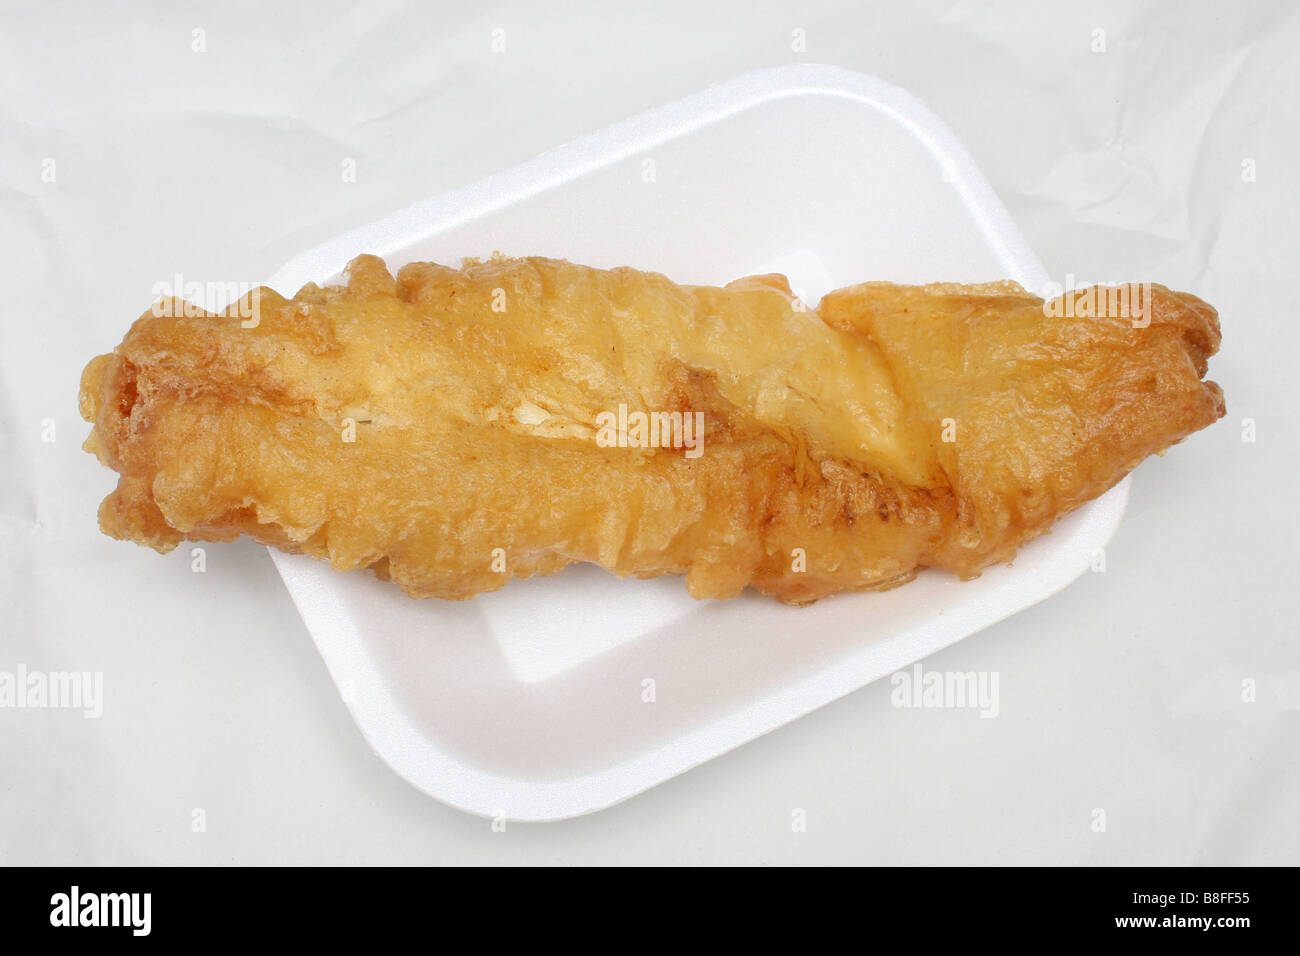 A piece of deep fried cod from a chip shop. Stock Photo